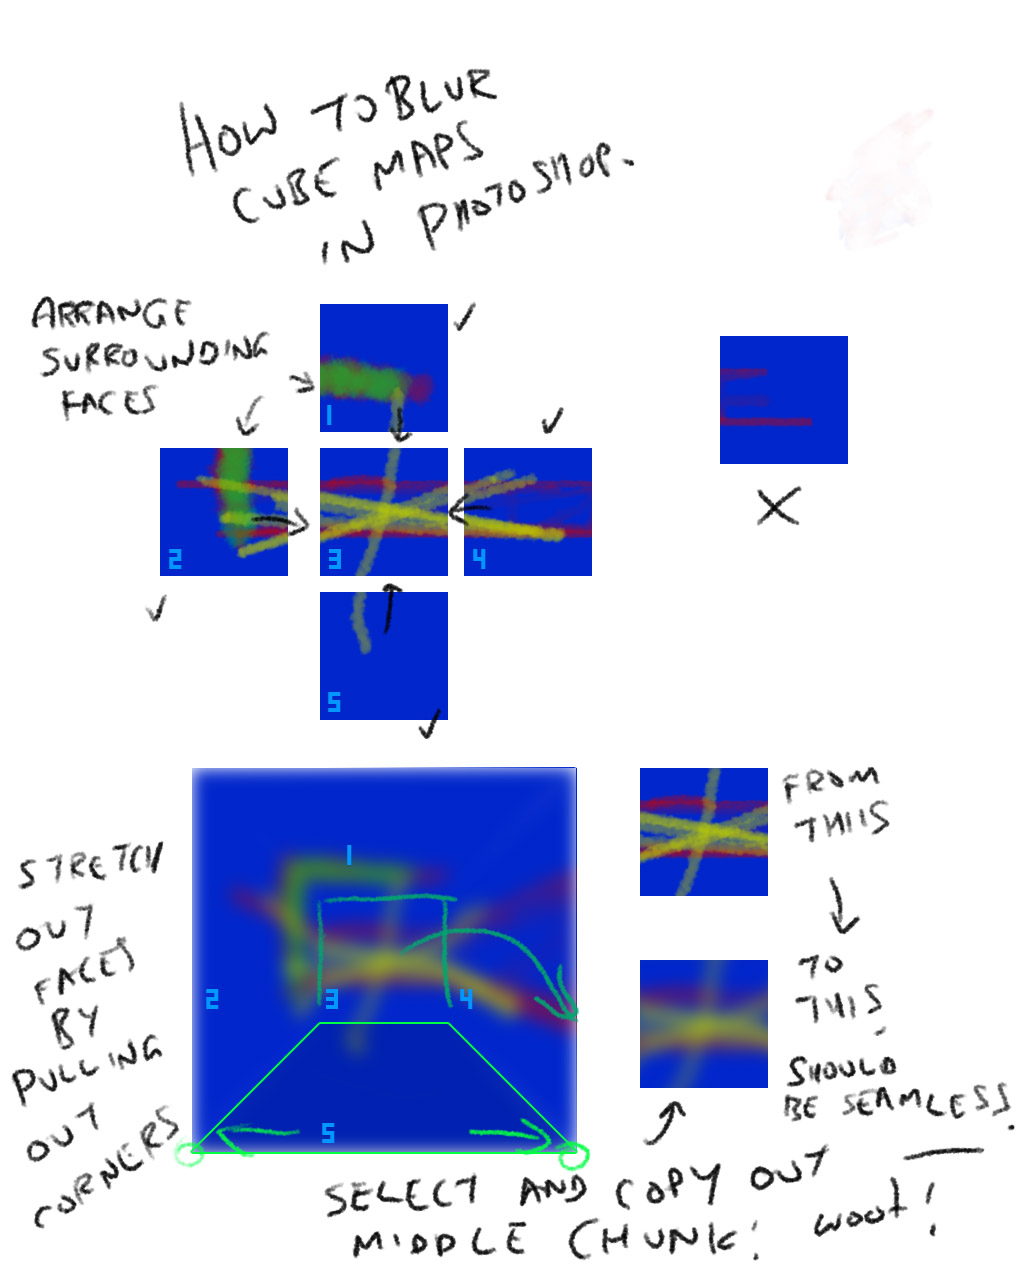 How_to_Blur_Cubemaps_in_PS_by_JohnnySix.jpg